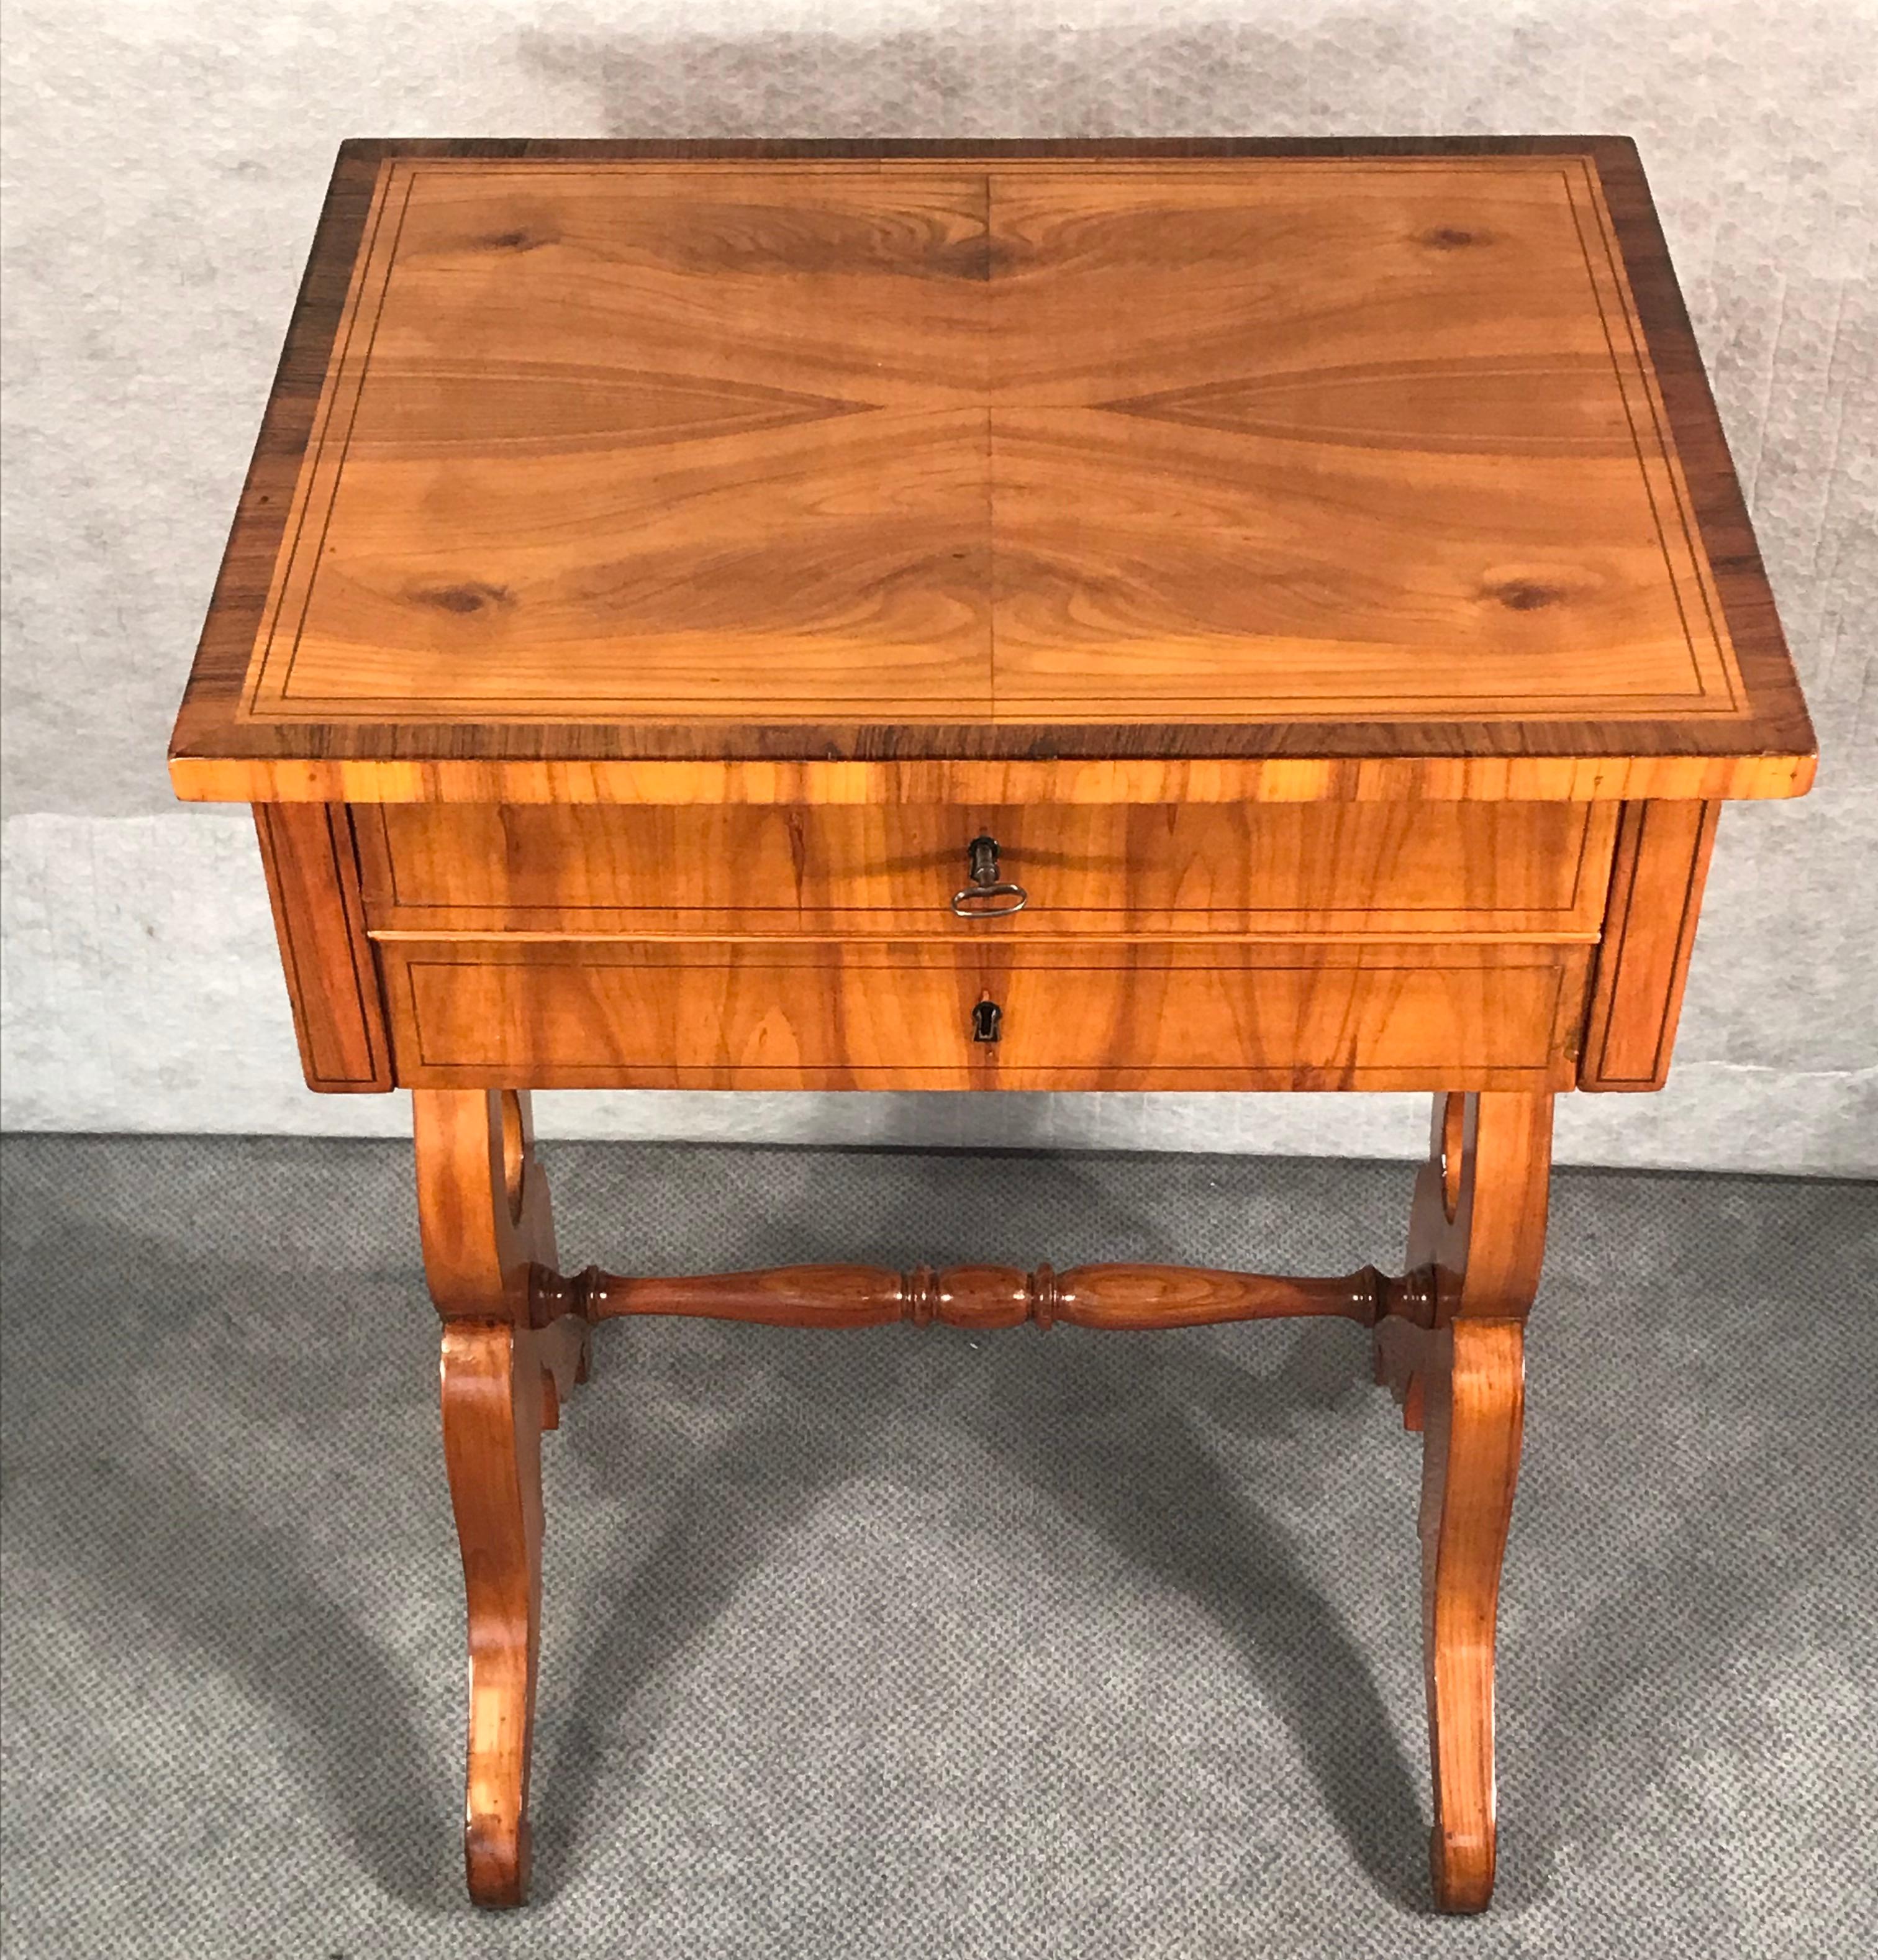 Biedermeier Sewing Table, South German 1820, Cherrywood In Good Condition For Sale In Belmont, MA